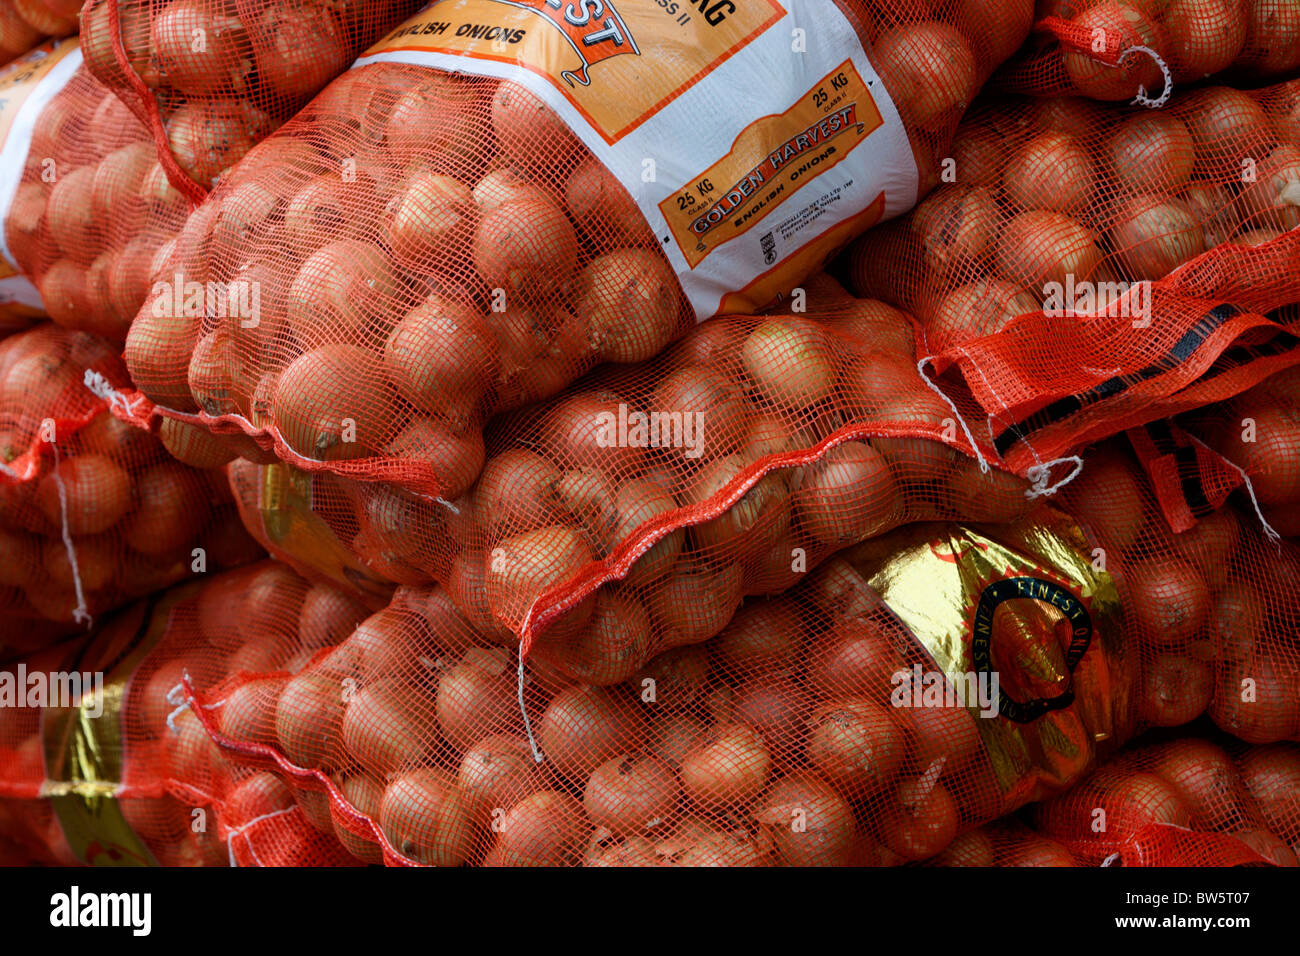 Sacks filled with Golden Harvest English onions, Brighton, East Sussex, UK. Stock Photo